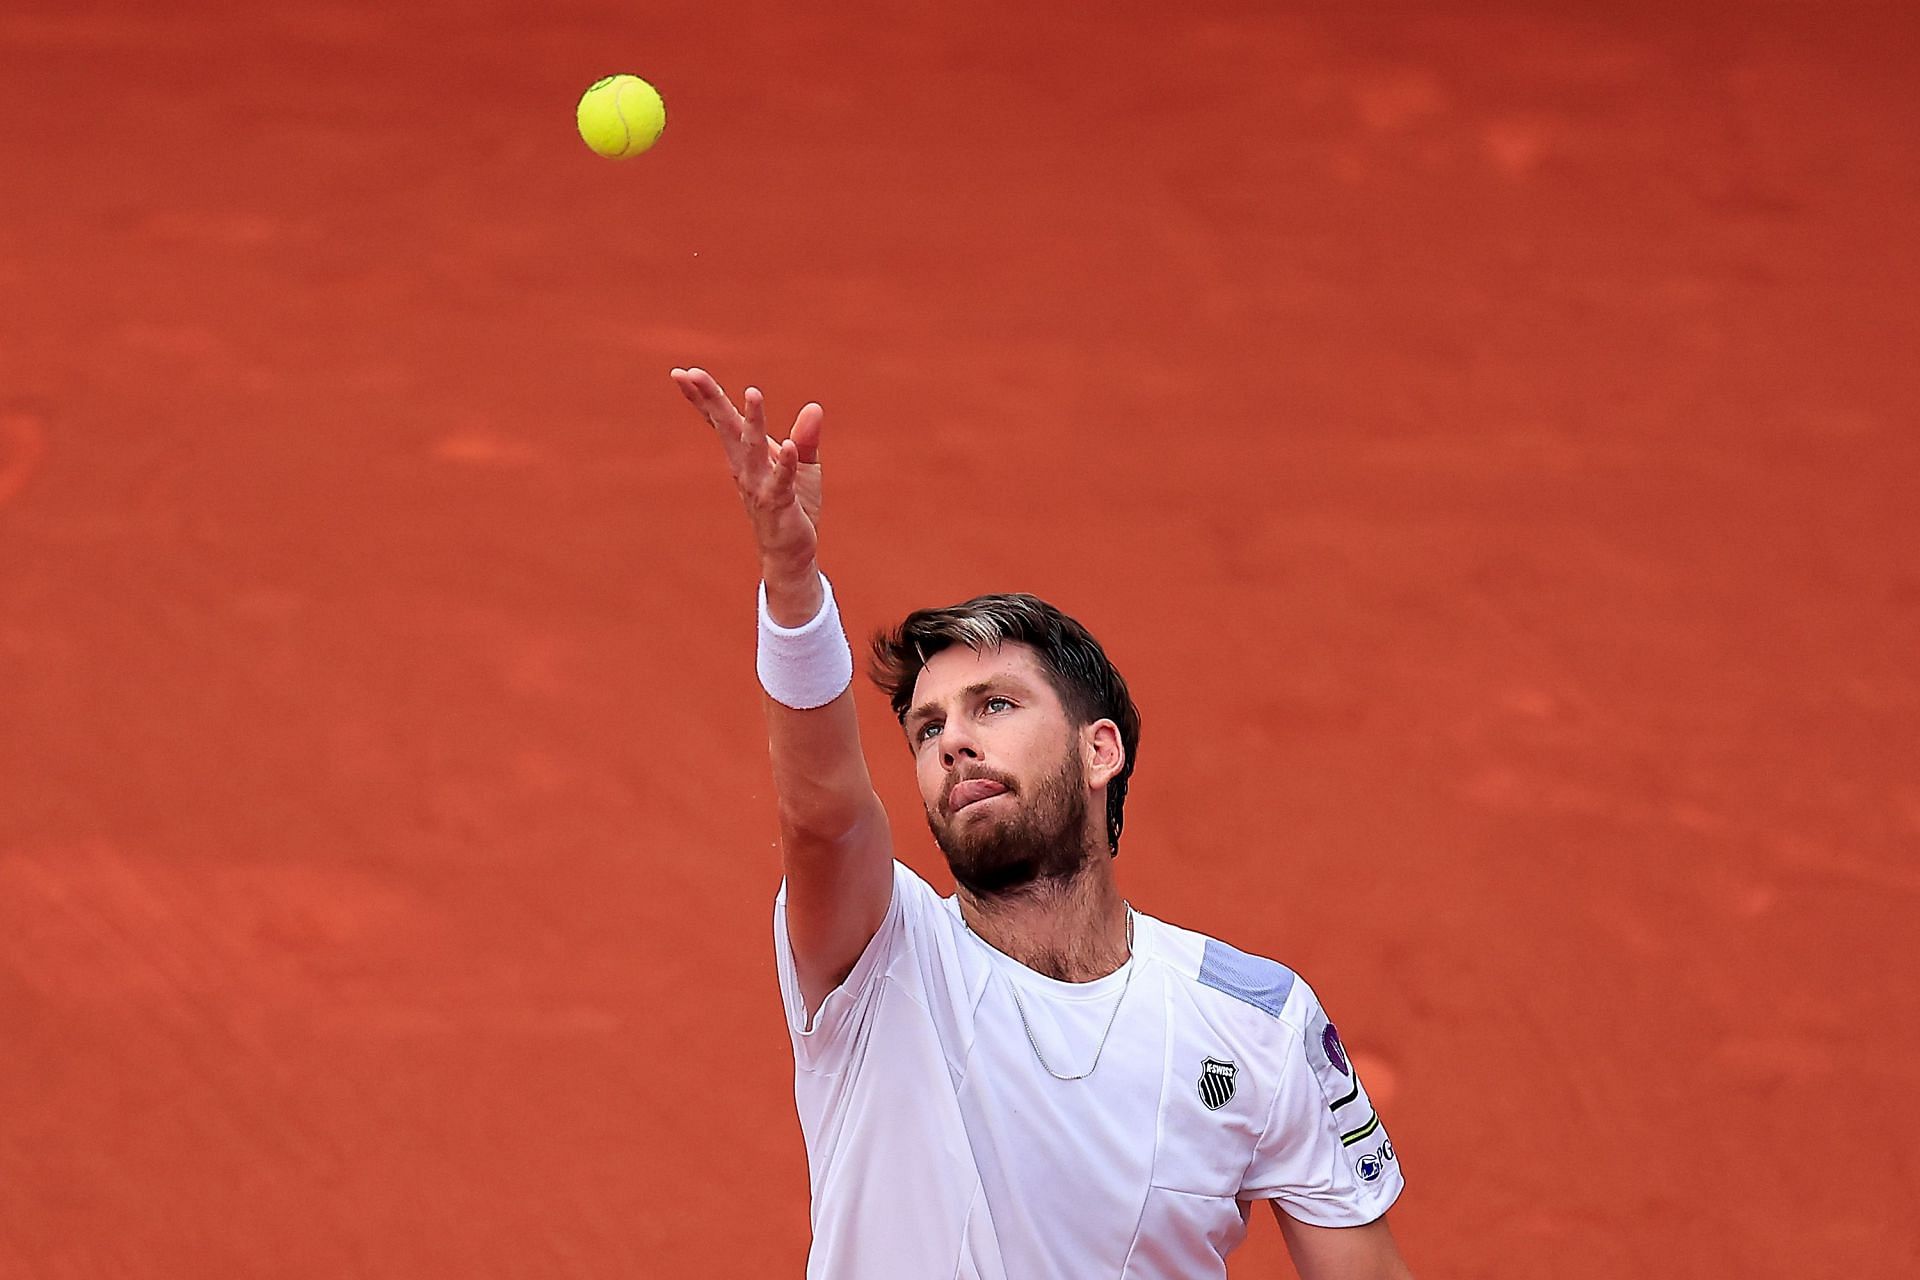 Norrie made the semifinals at the Rio Open.